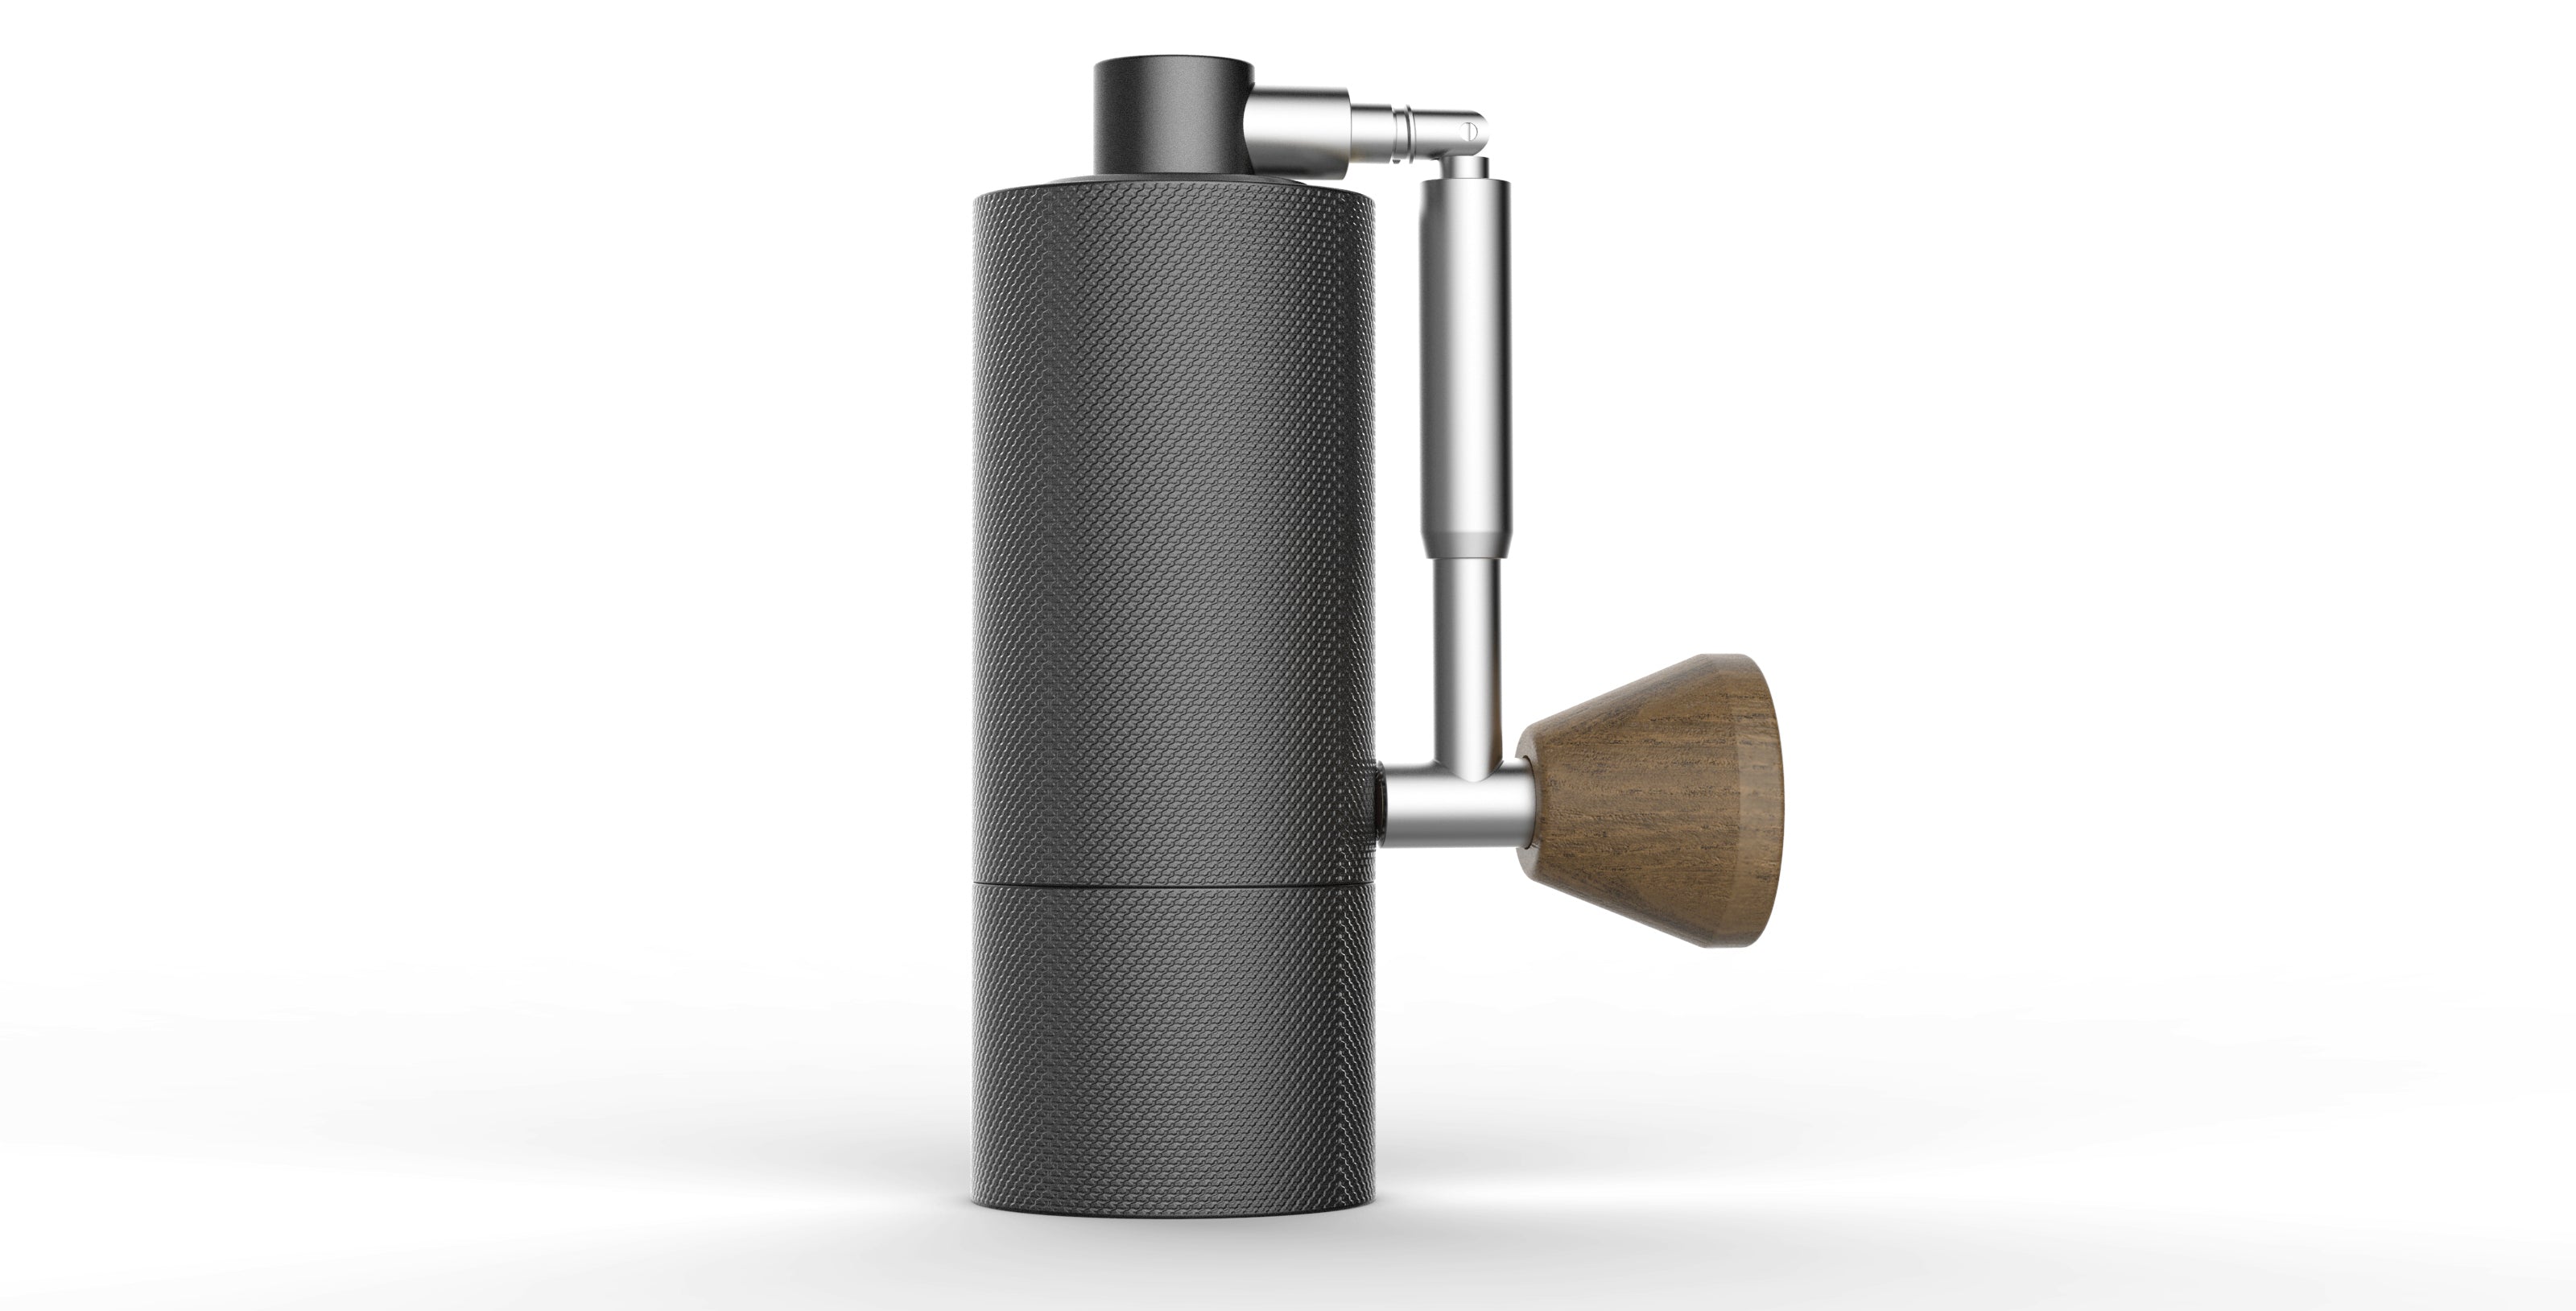 Video Overview  Timemore Nano Hand Grinder 